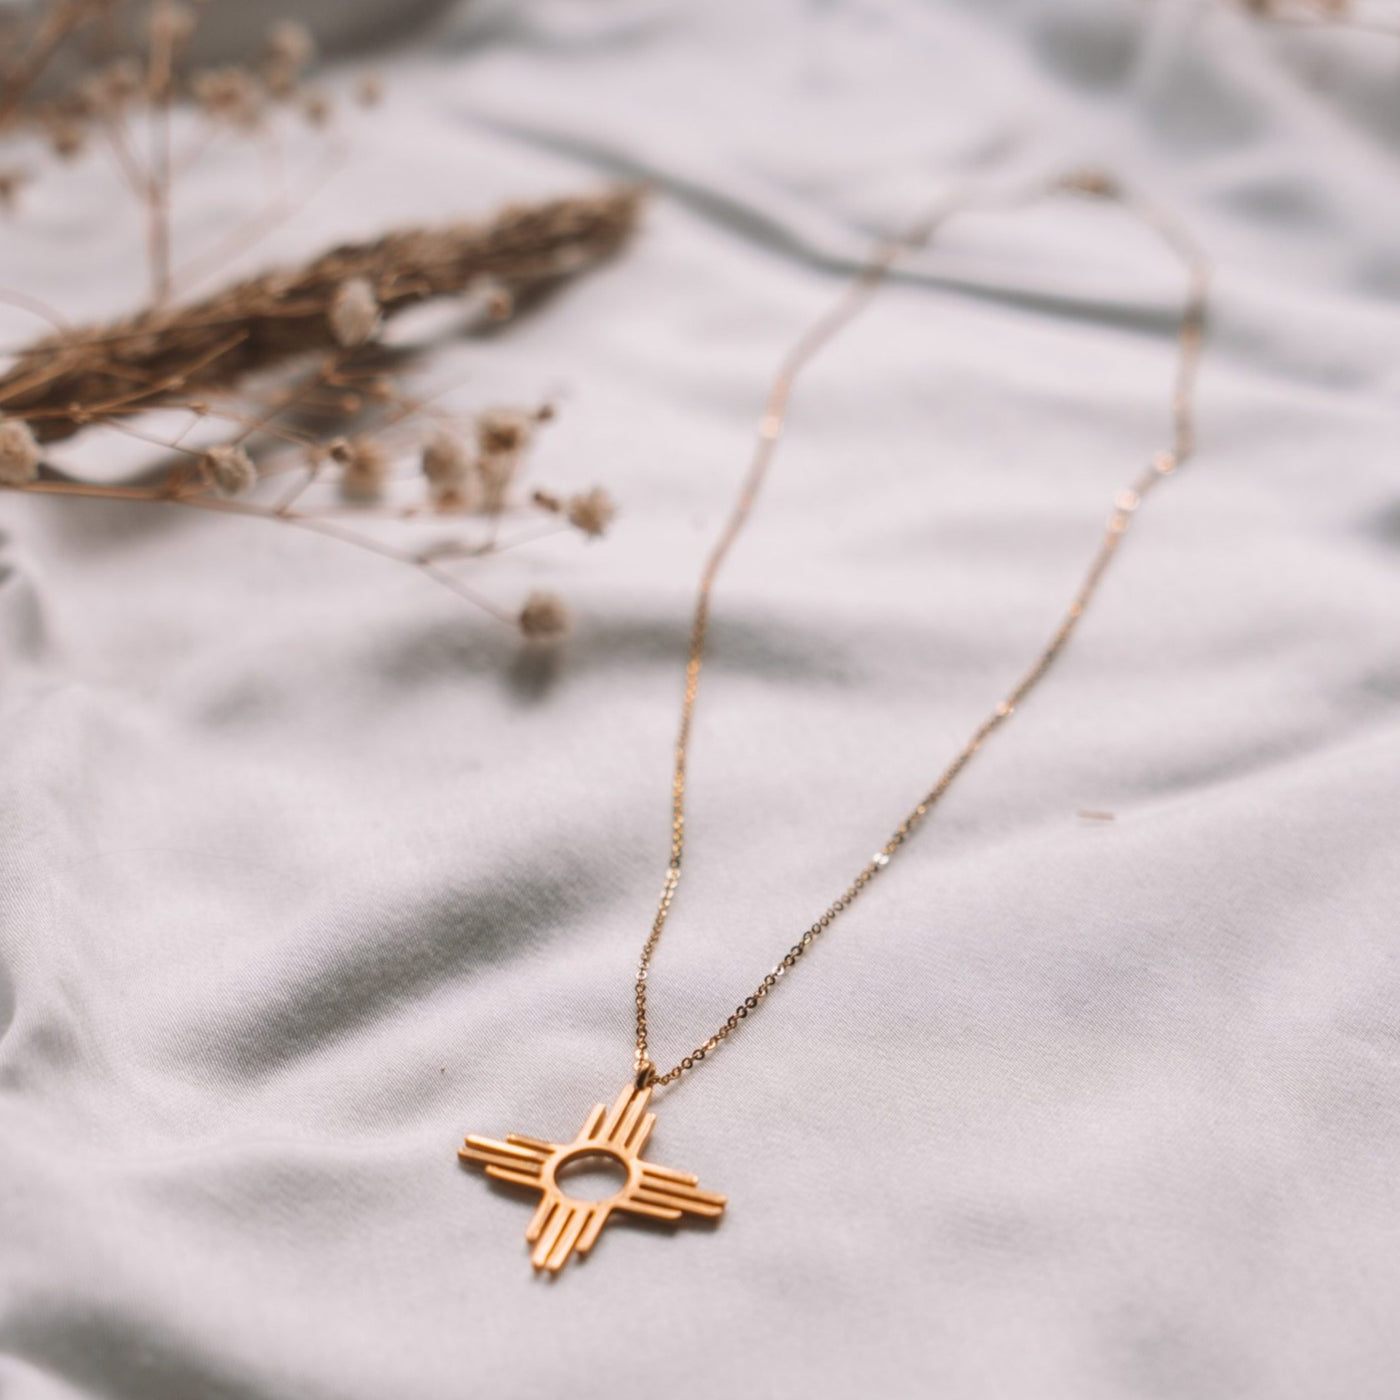 Handcrafted Gold Zia Symbol Necklace | T.Skies Jewelry